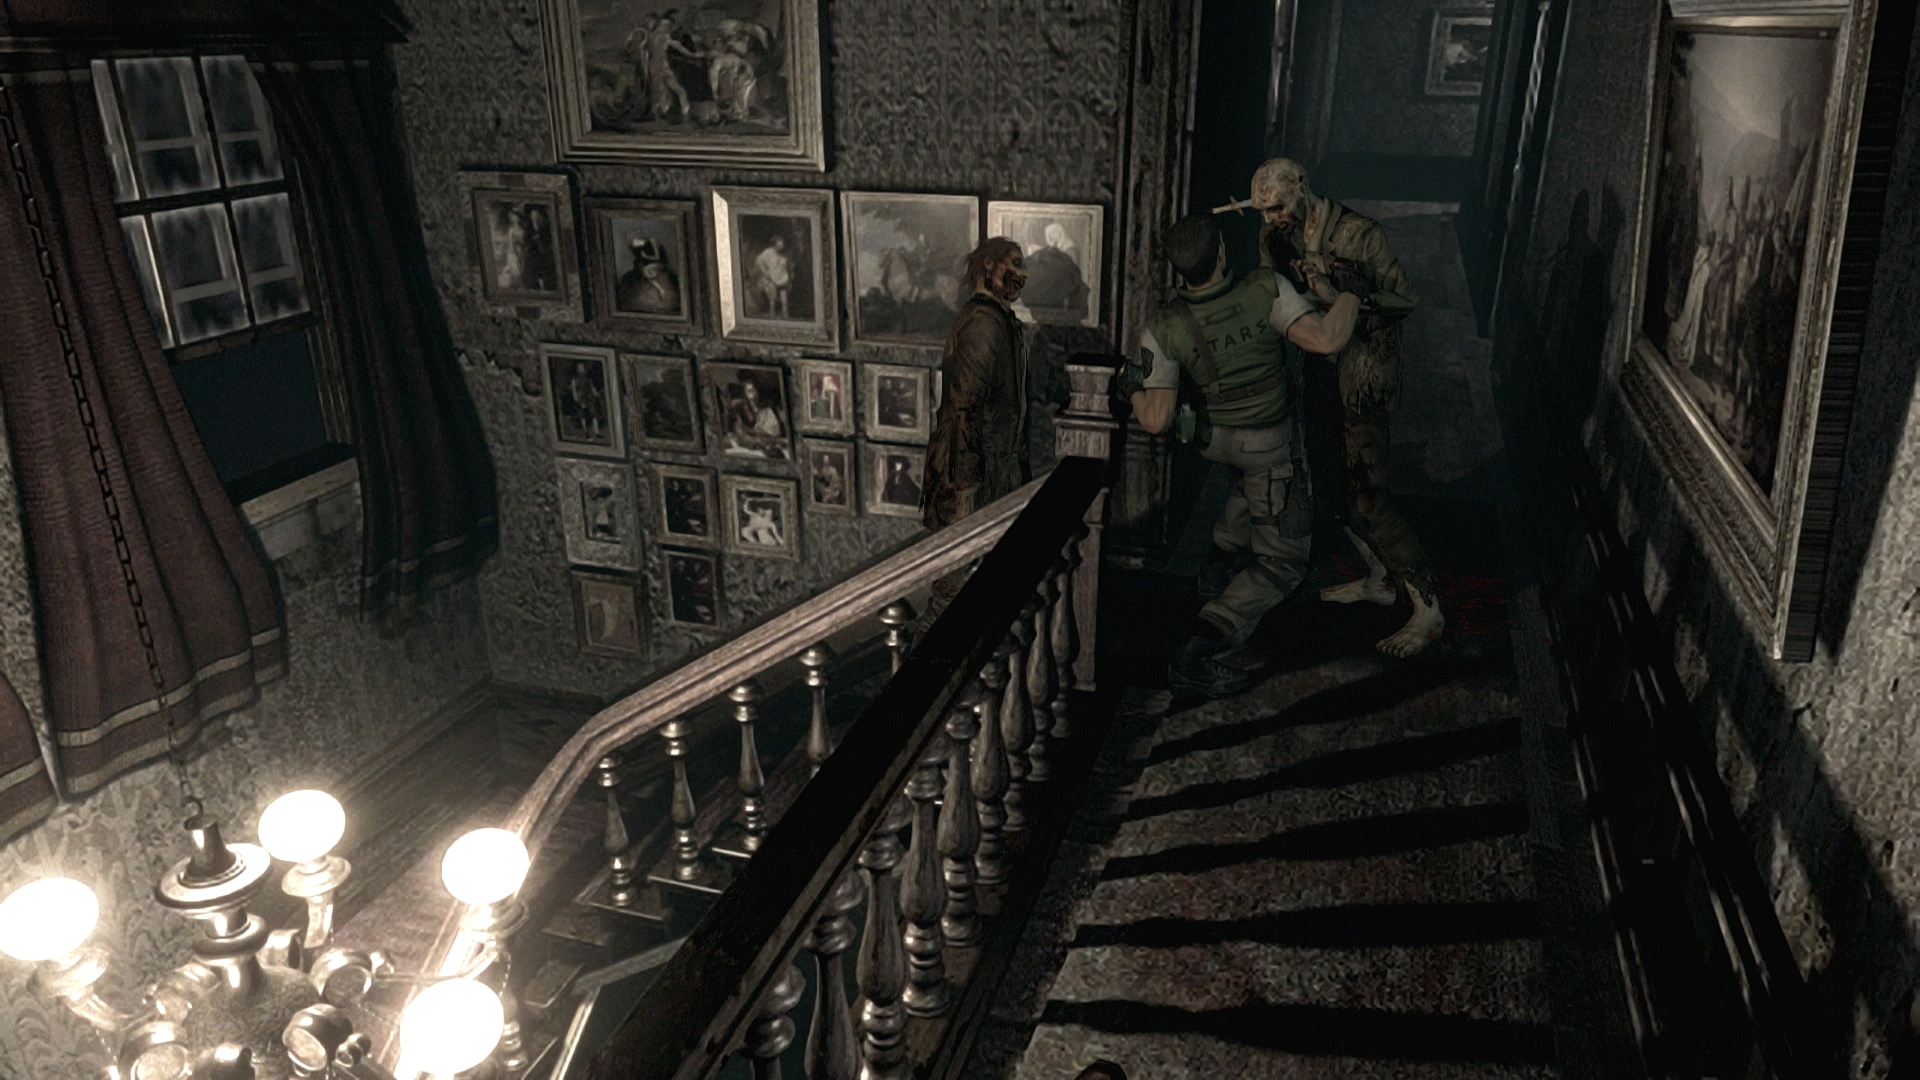 Resident Evil Origins Collection announced for PS4 and Xbox One